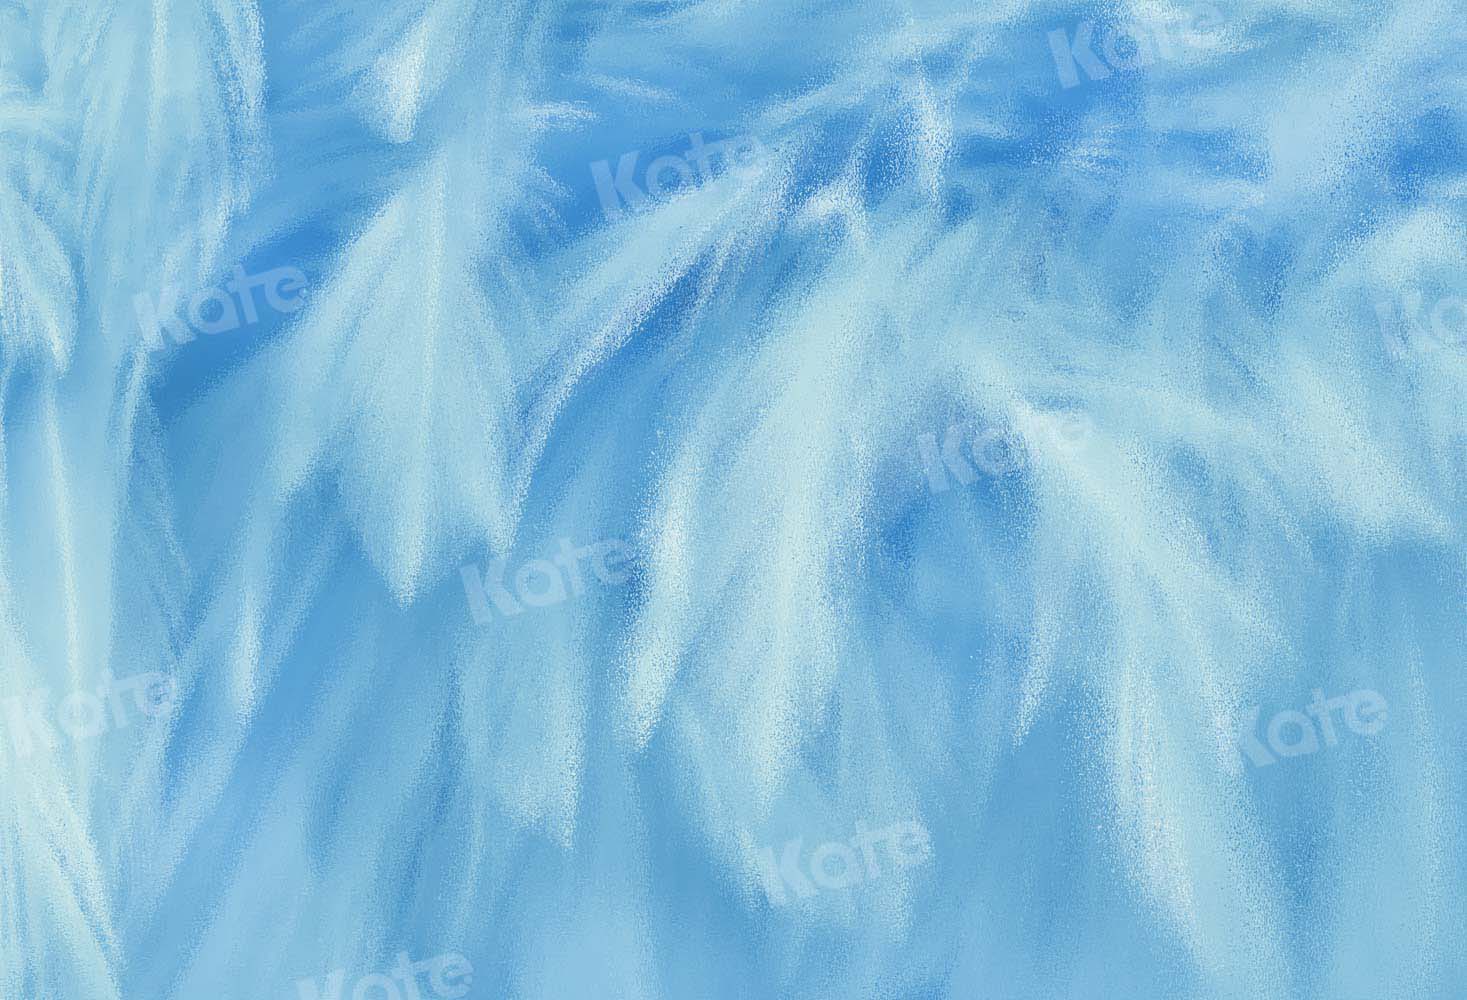 Kate Abstract Blue Dream Backdrop Designed by Emetselch